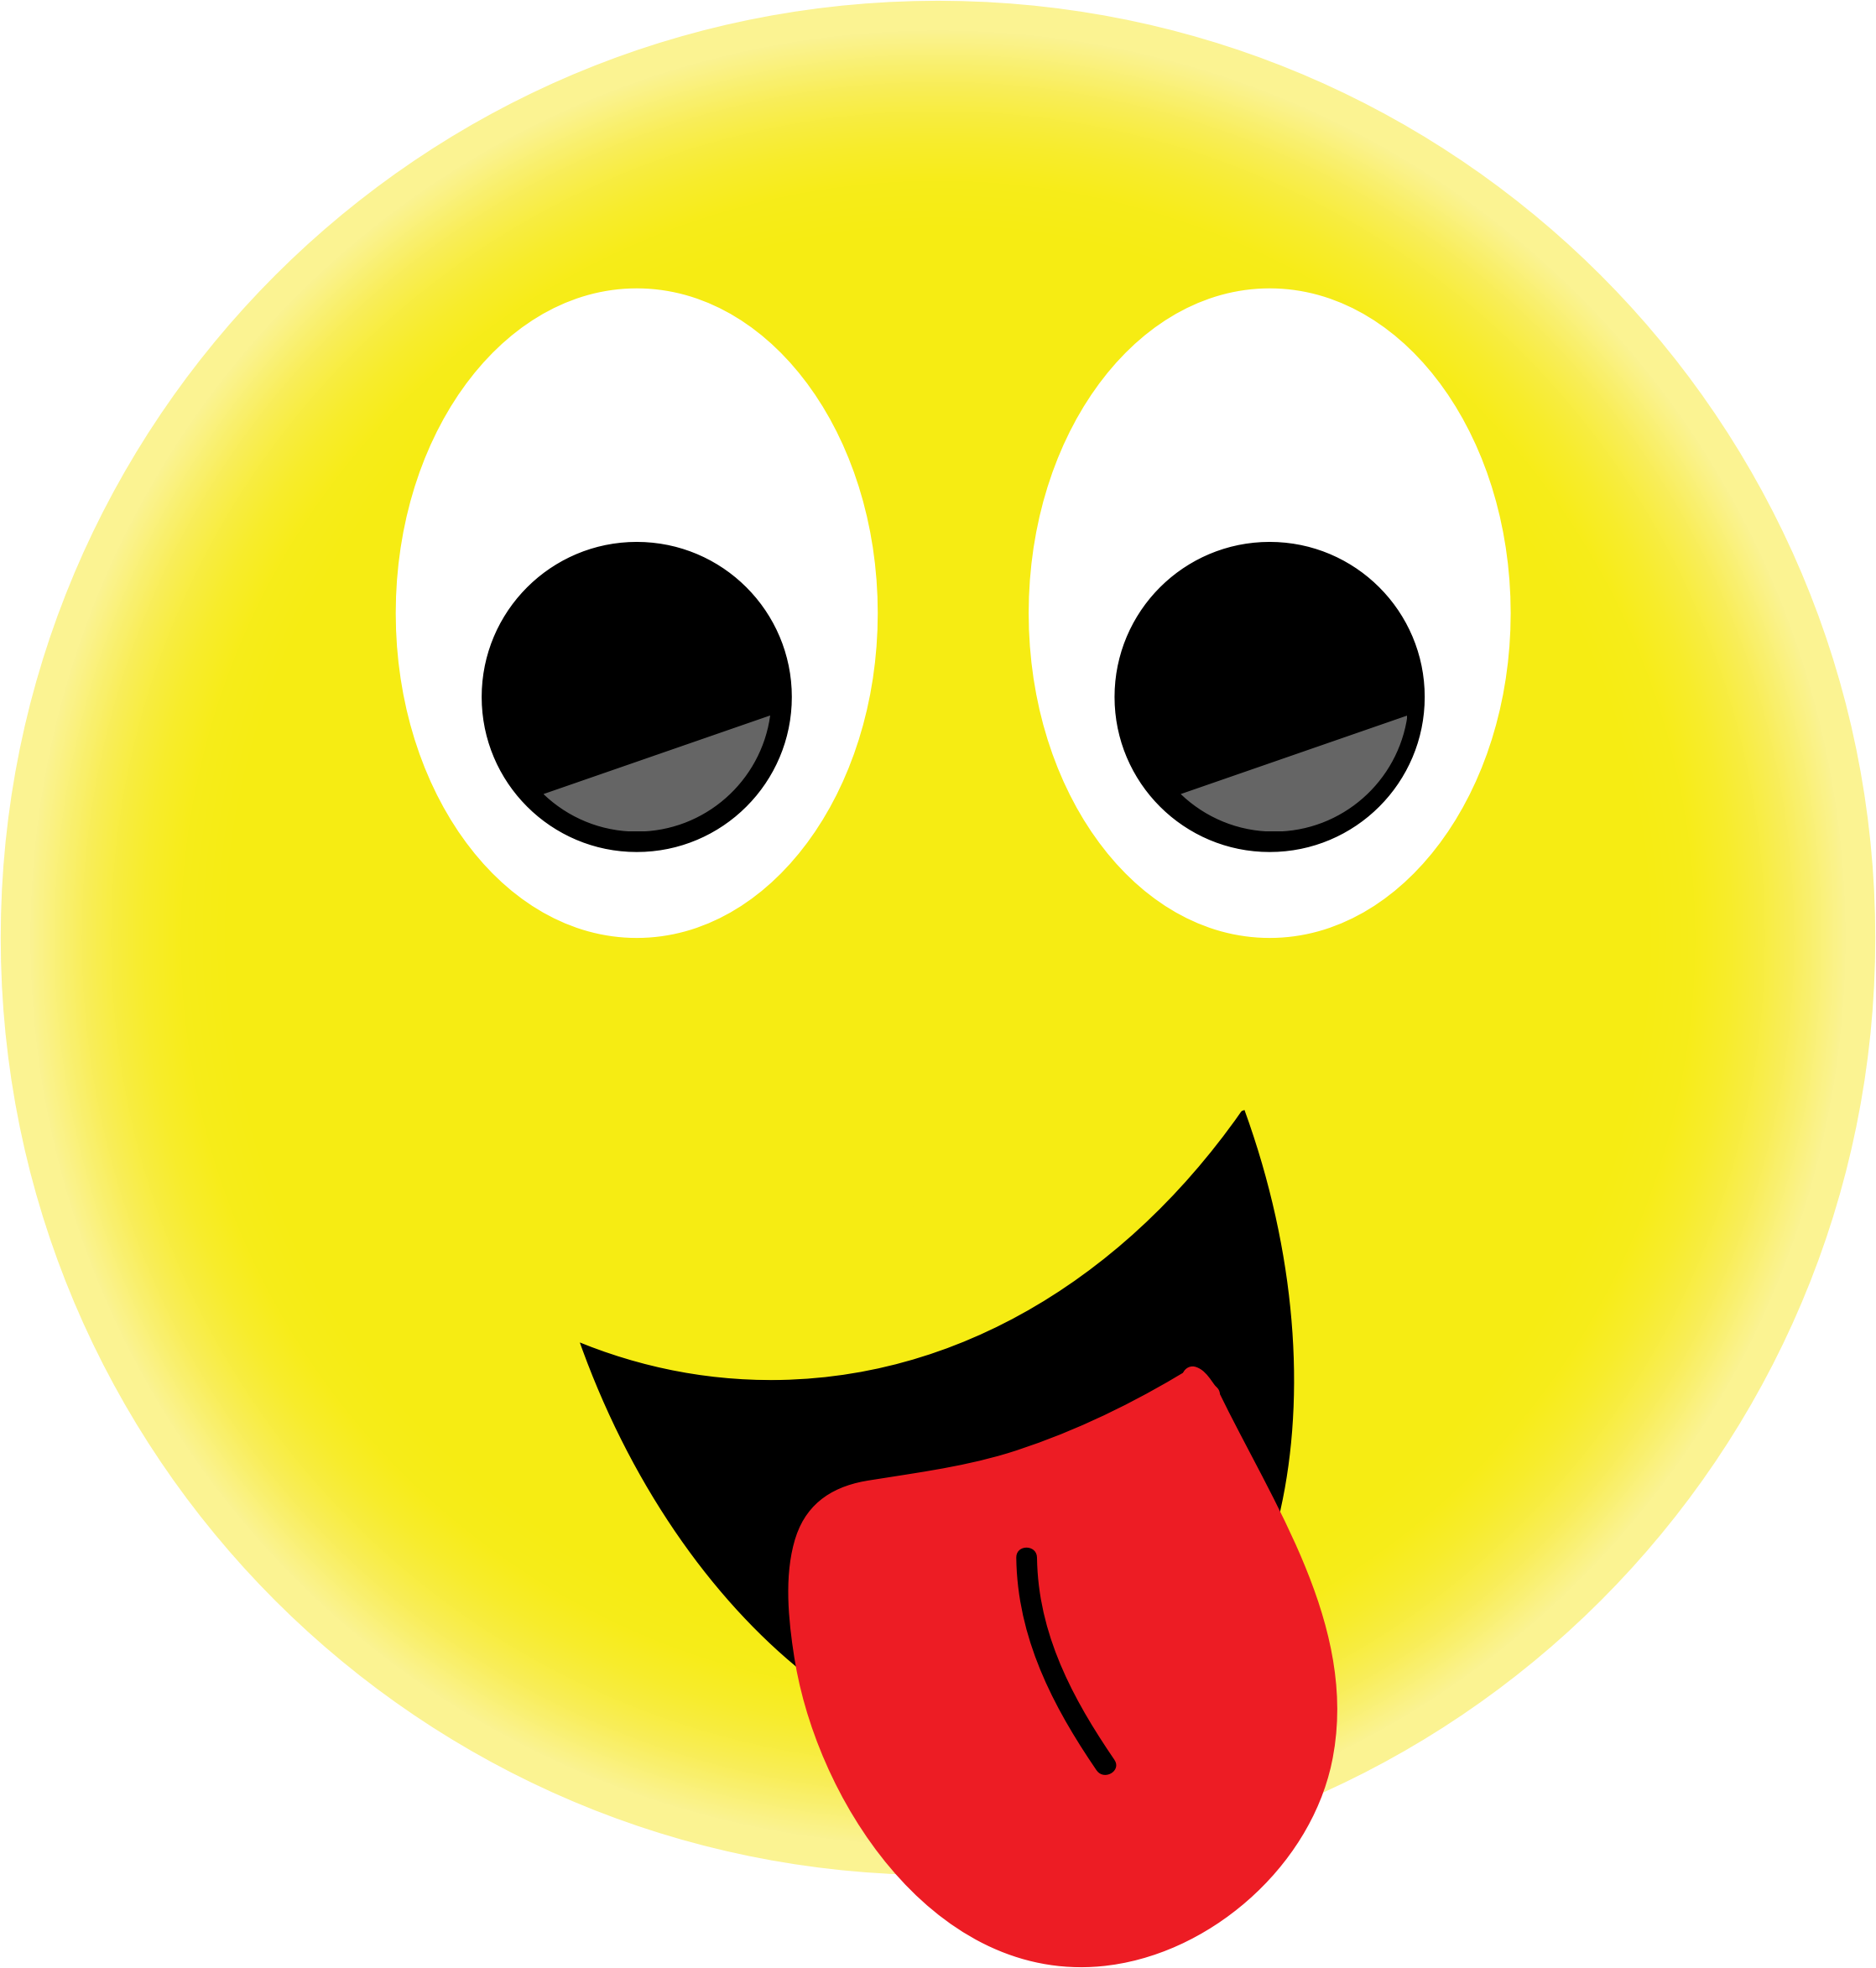 Smiley Face With Tongue Out - Smiley Face With Tongue Out, Transparent background PNG HD thumbnail